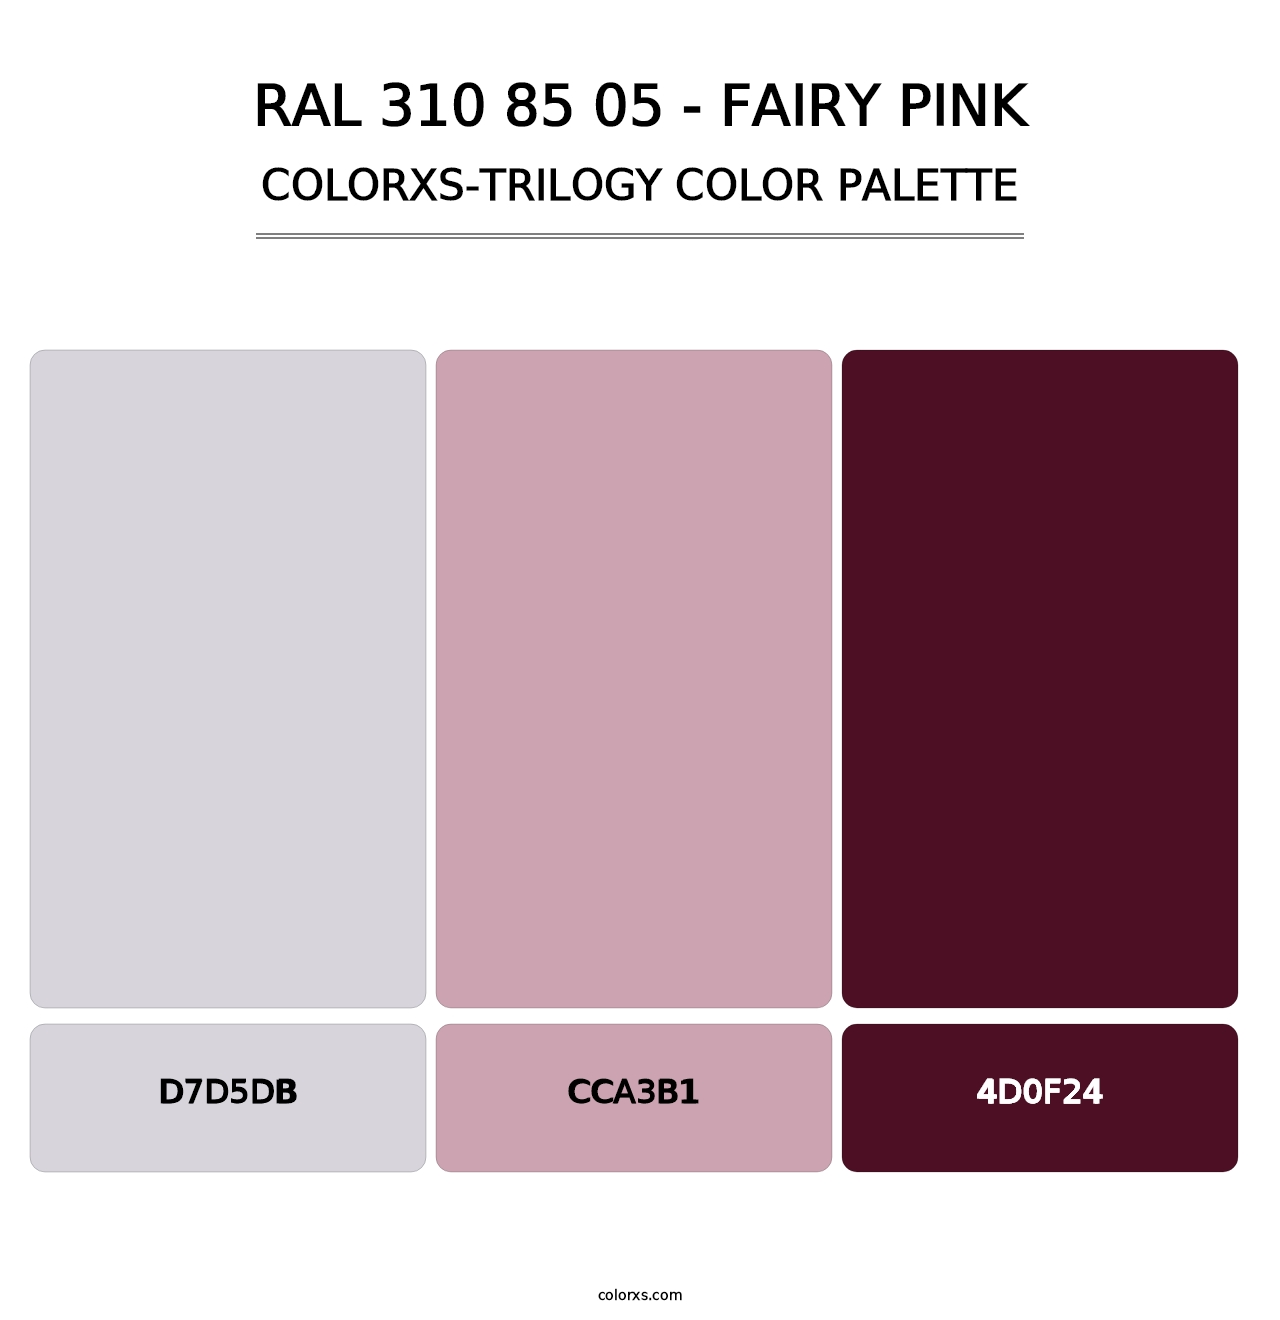 RAL 310 85 05 - Fairy Pink - Colorxs Trilogy Palette